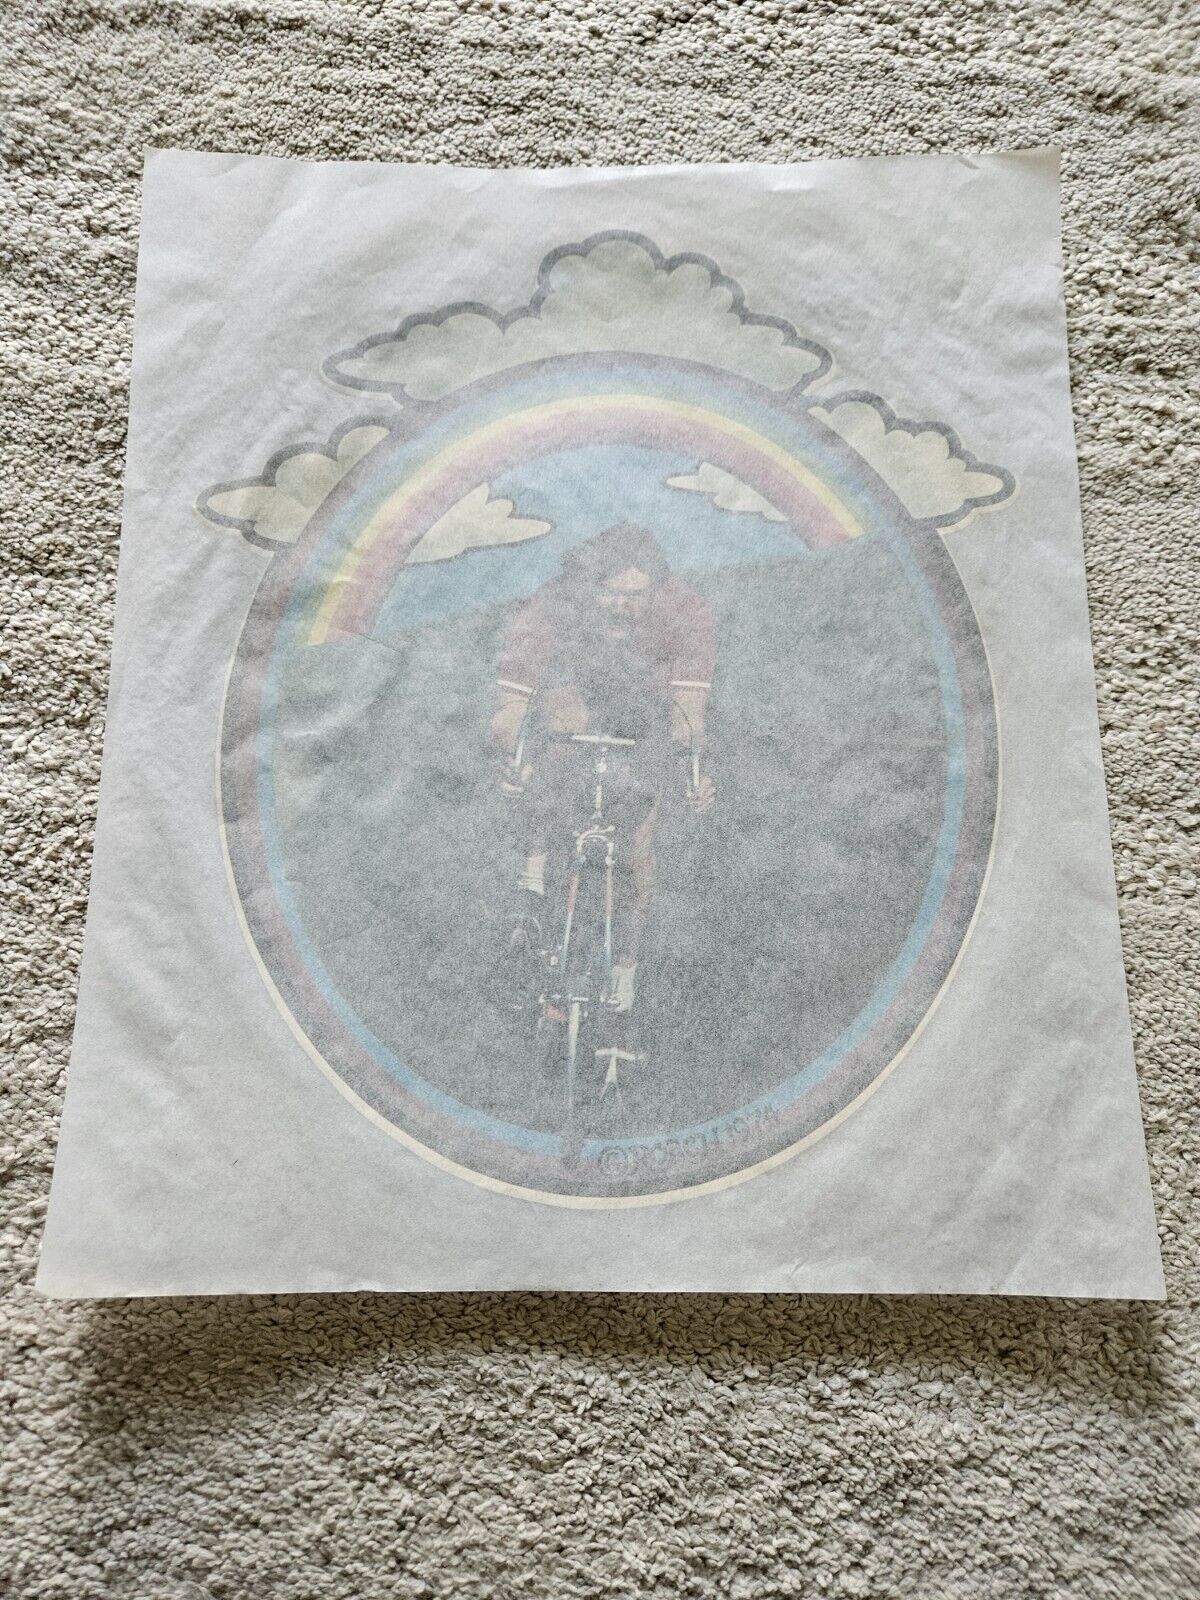 Man On Bicycle  1970 Clouds Rainbow Iron On T Shirt Patch